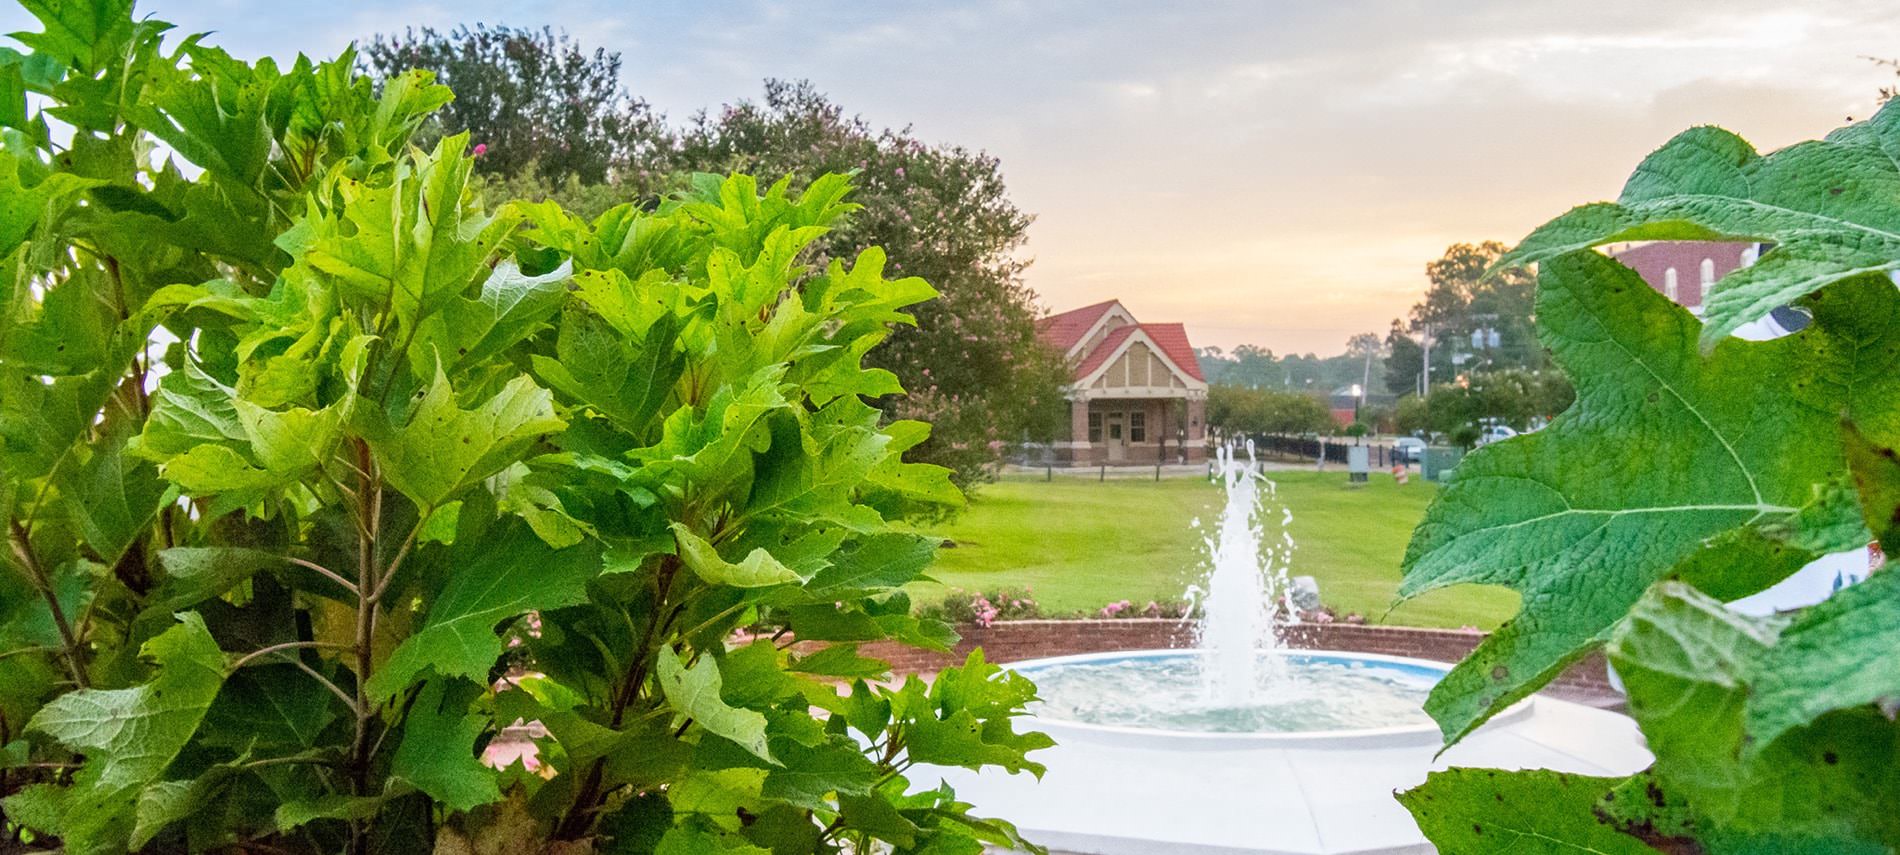 View of a water fountain spouting water into the air through greenery overlooking a bright green lawn